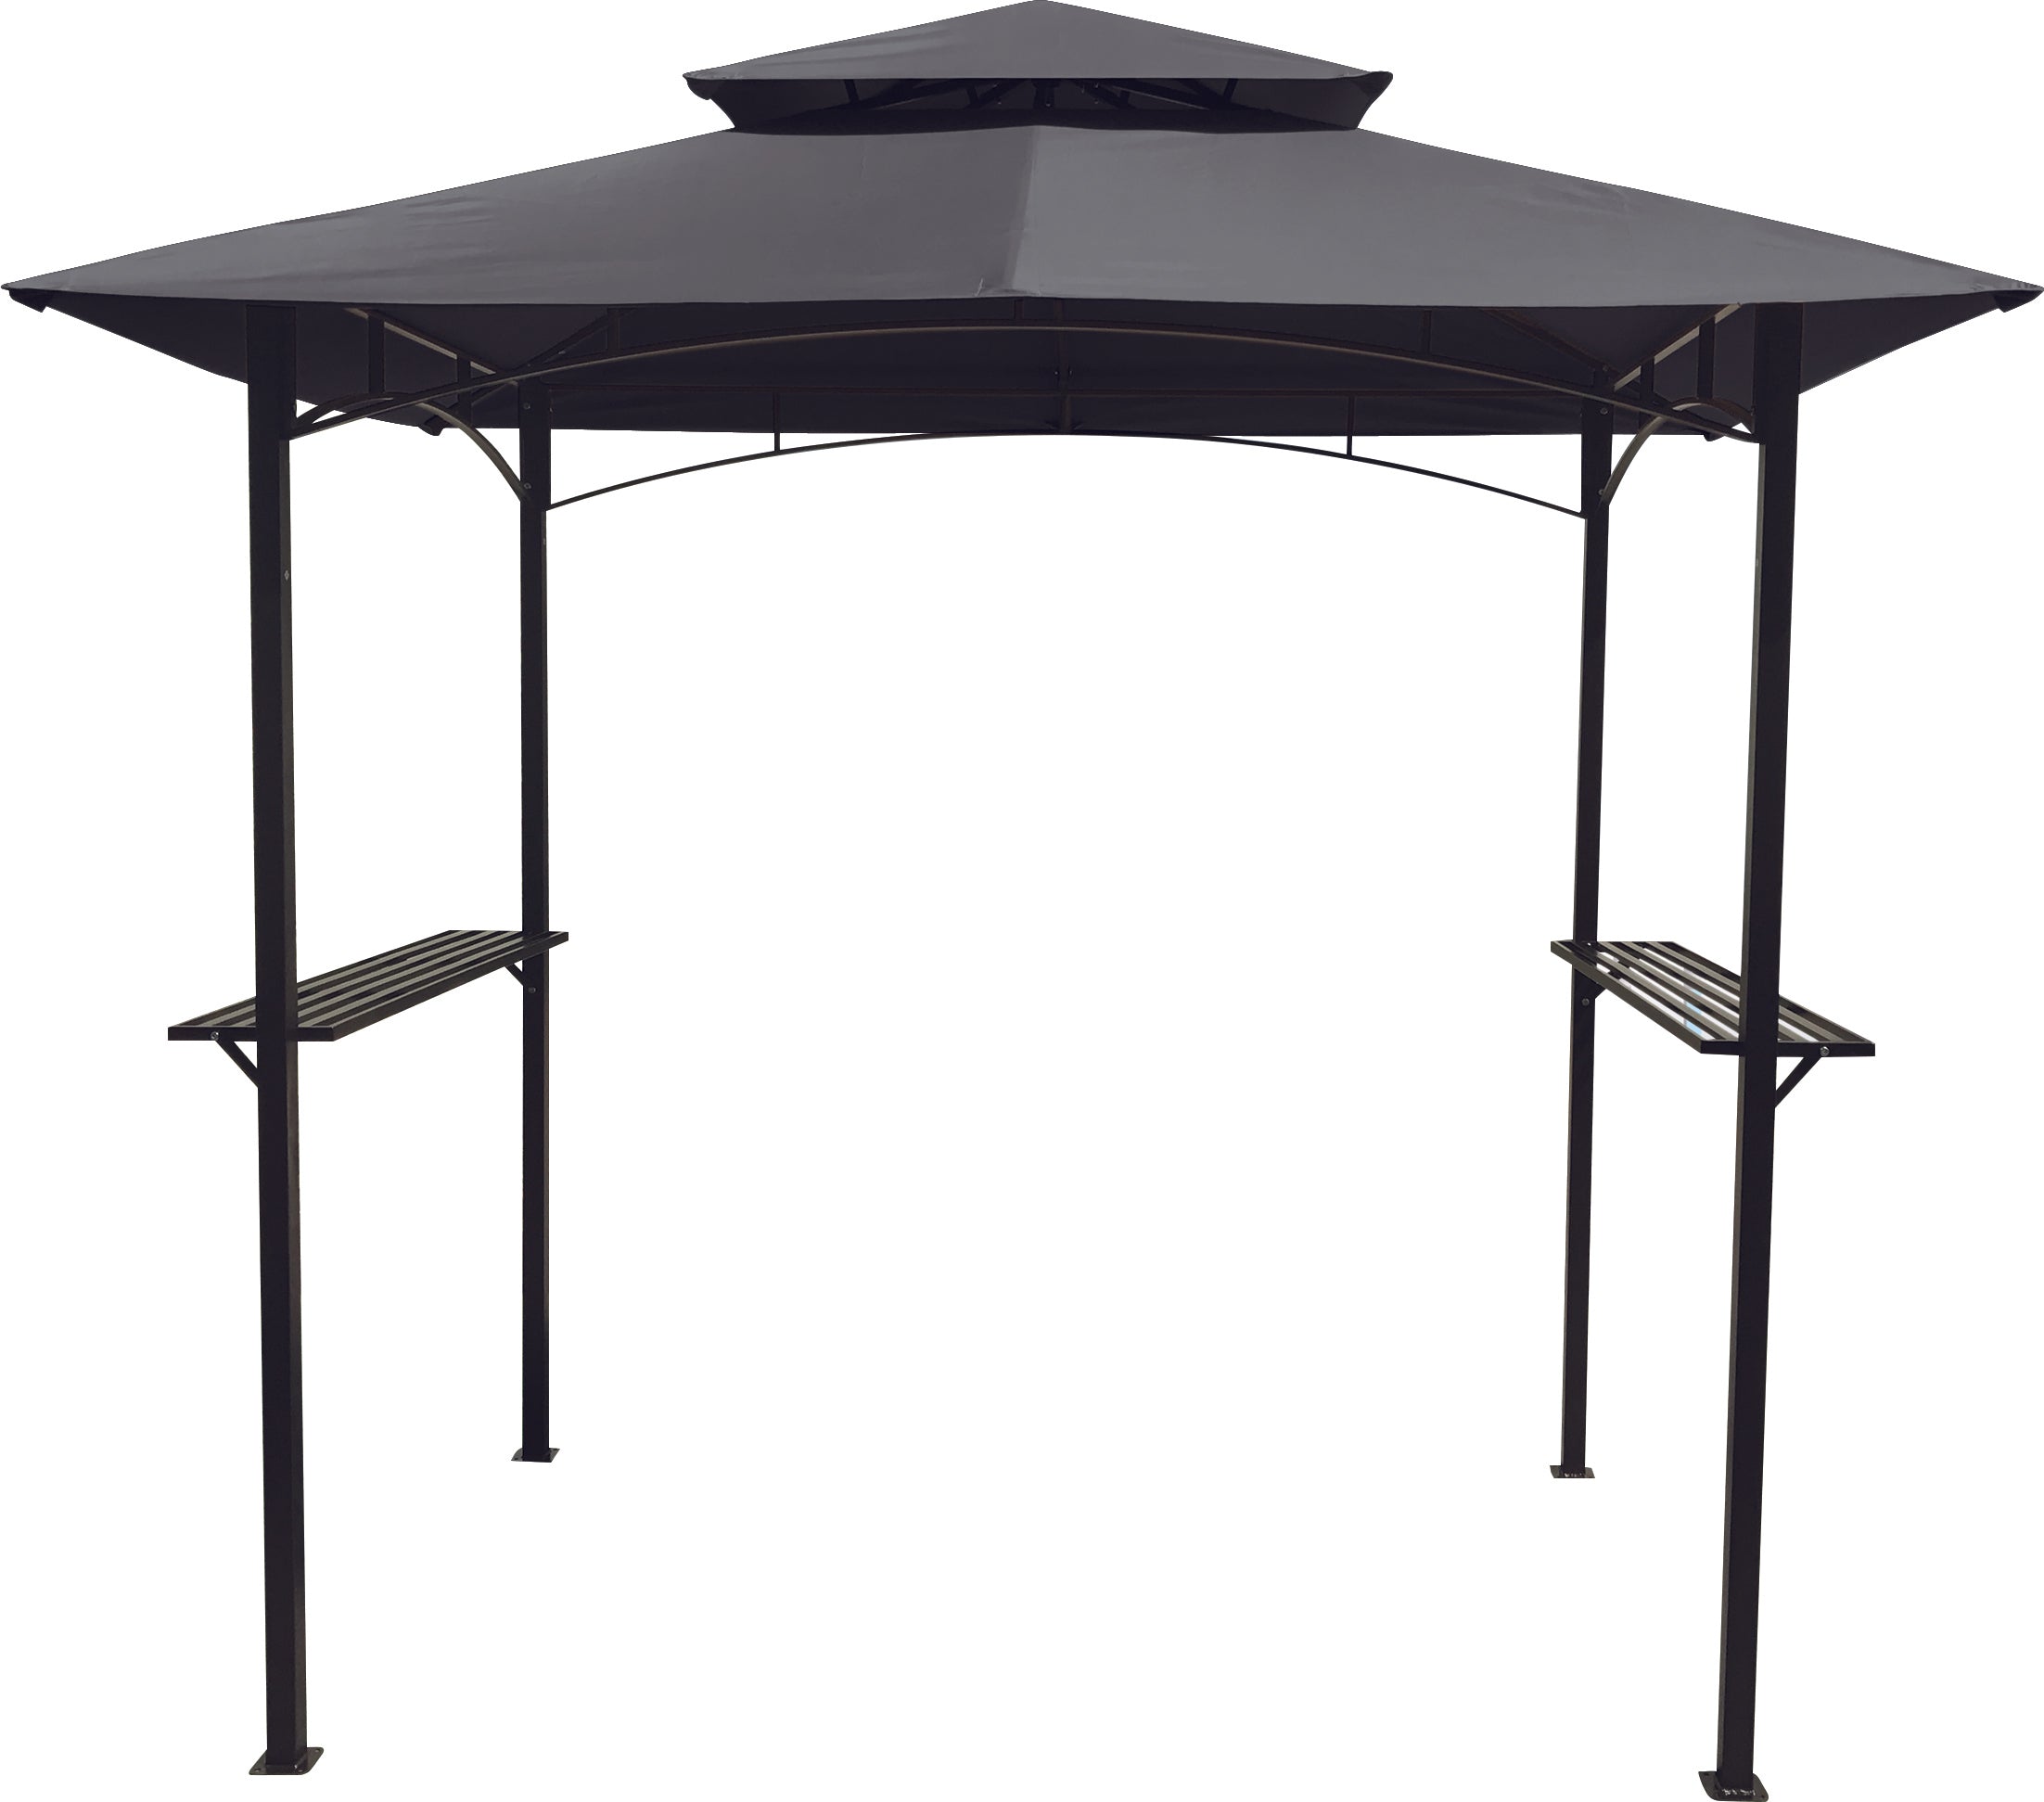 Replacement Parts for BBQ grilling Gazebo with LED lights 911268